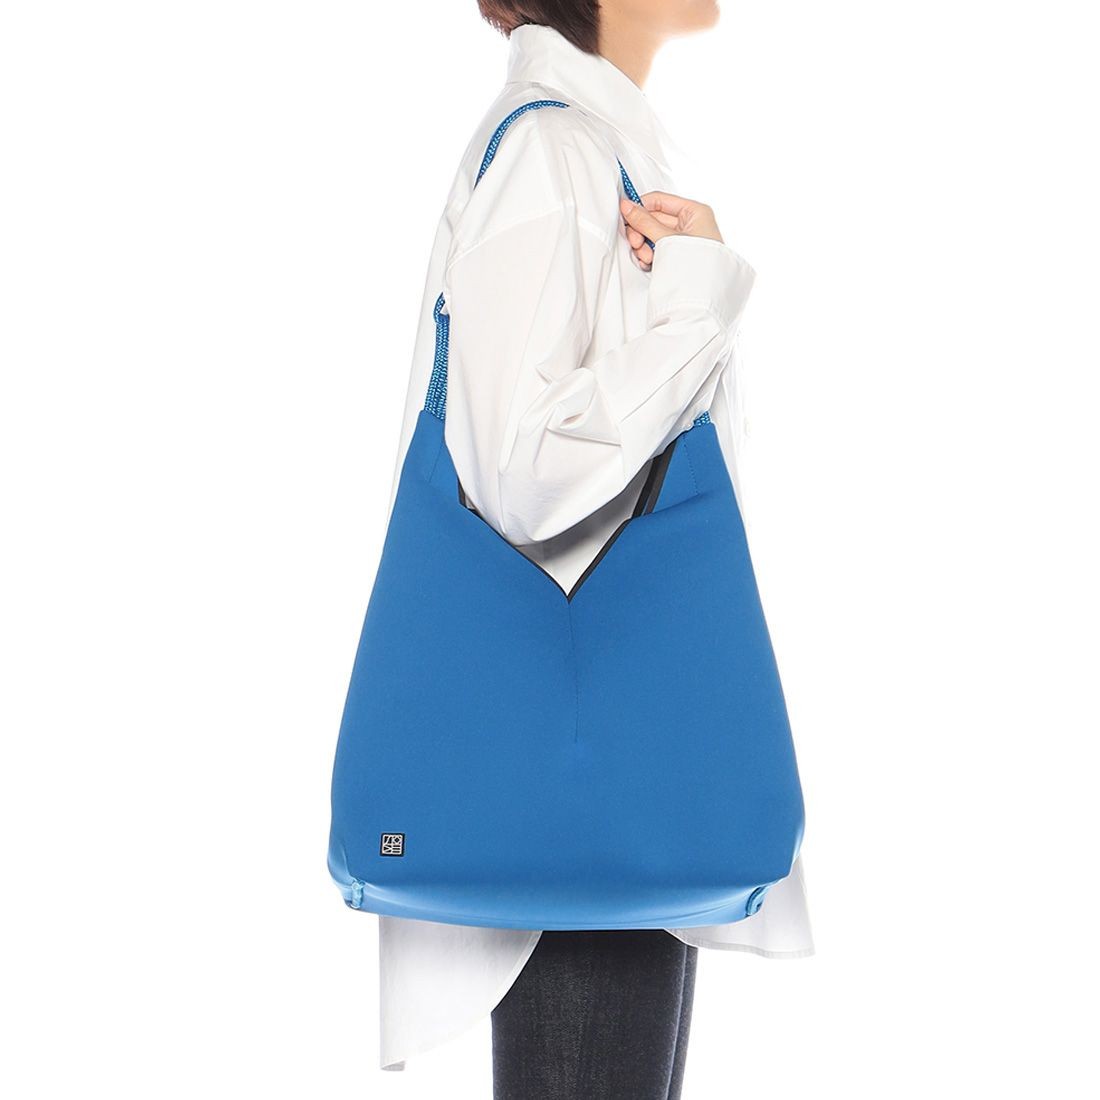 ”SOLSTICE TOTE” バッグ